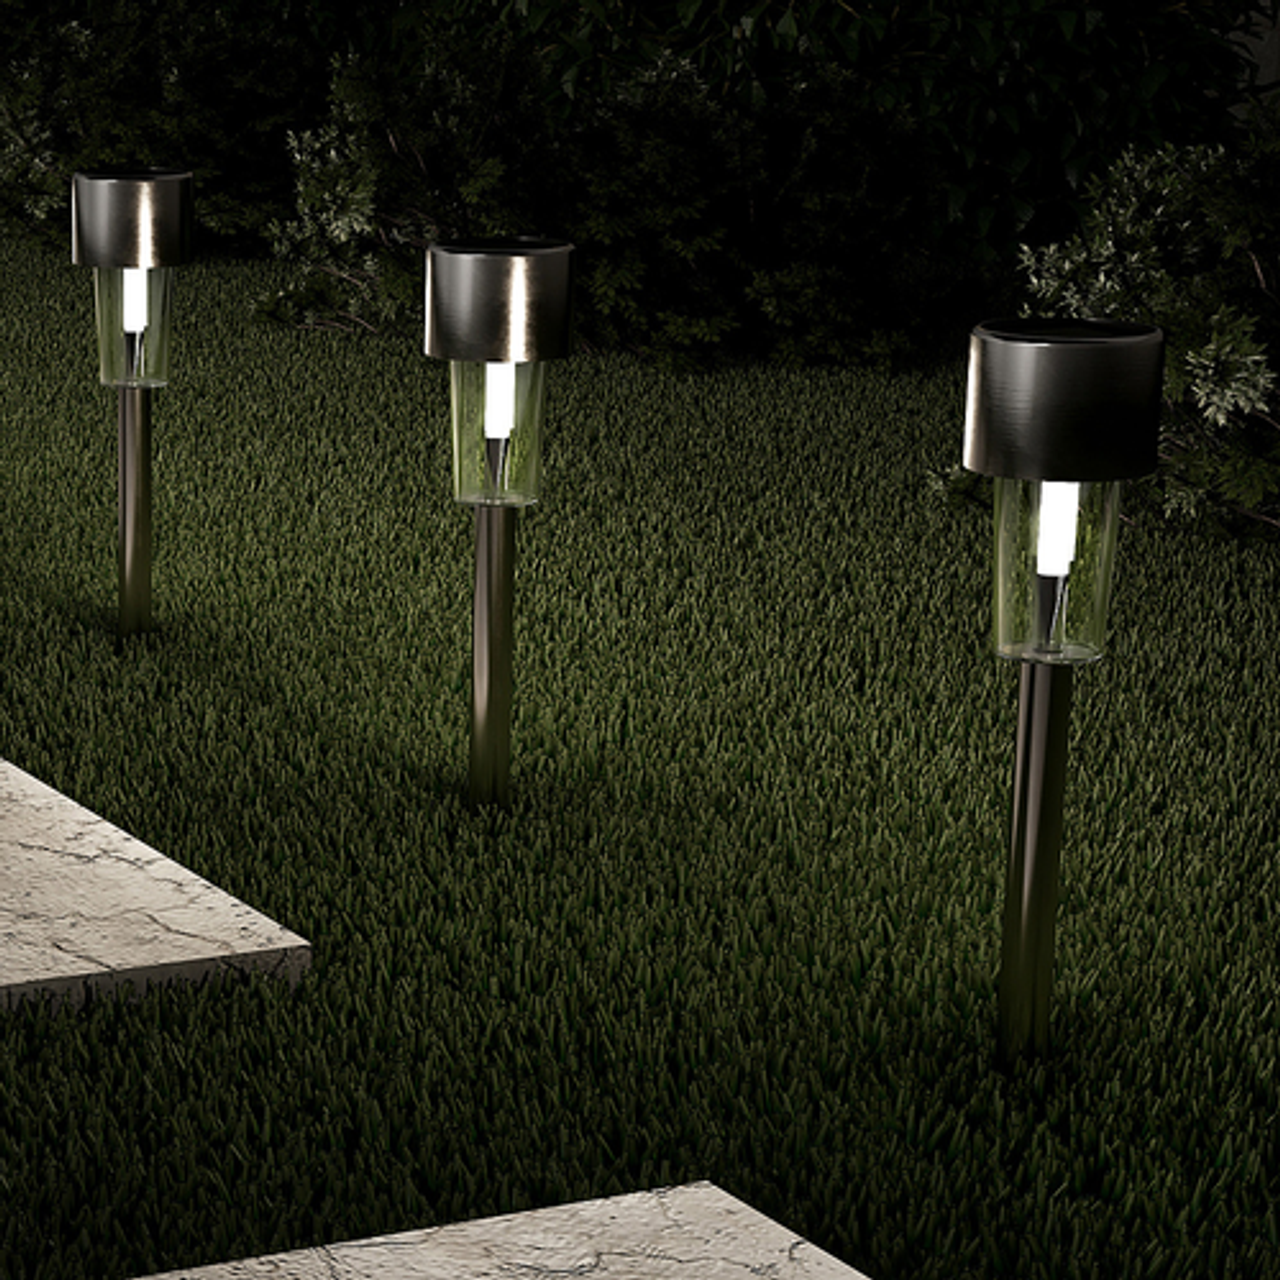 Nature Spring - Solar Path Lights - 12.2” Stainless Steel Outdoor Stake Lighting for Garden, Landscape, Driveway, Walkway - Set of 12 - Brushed Aluminum